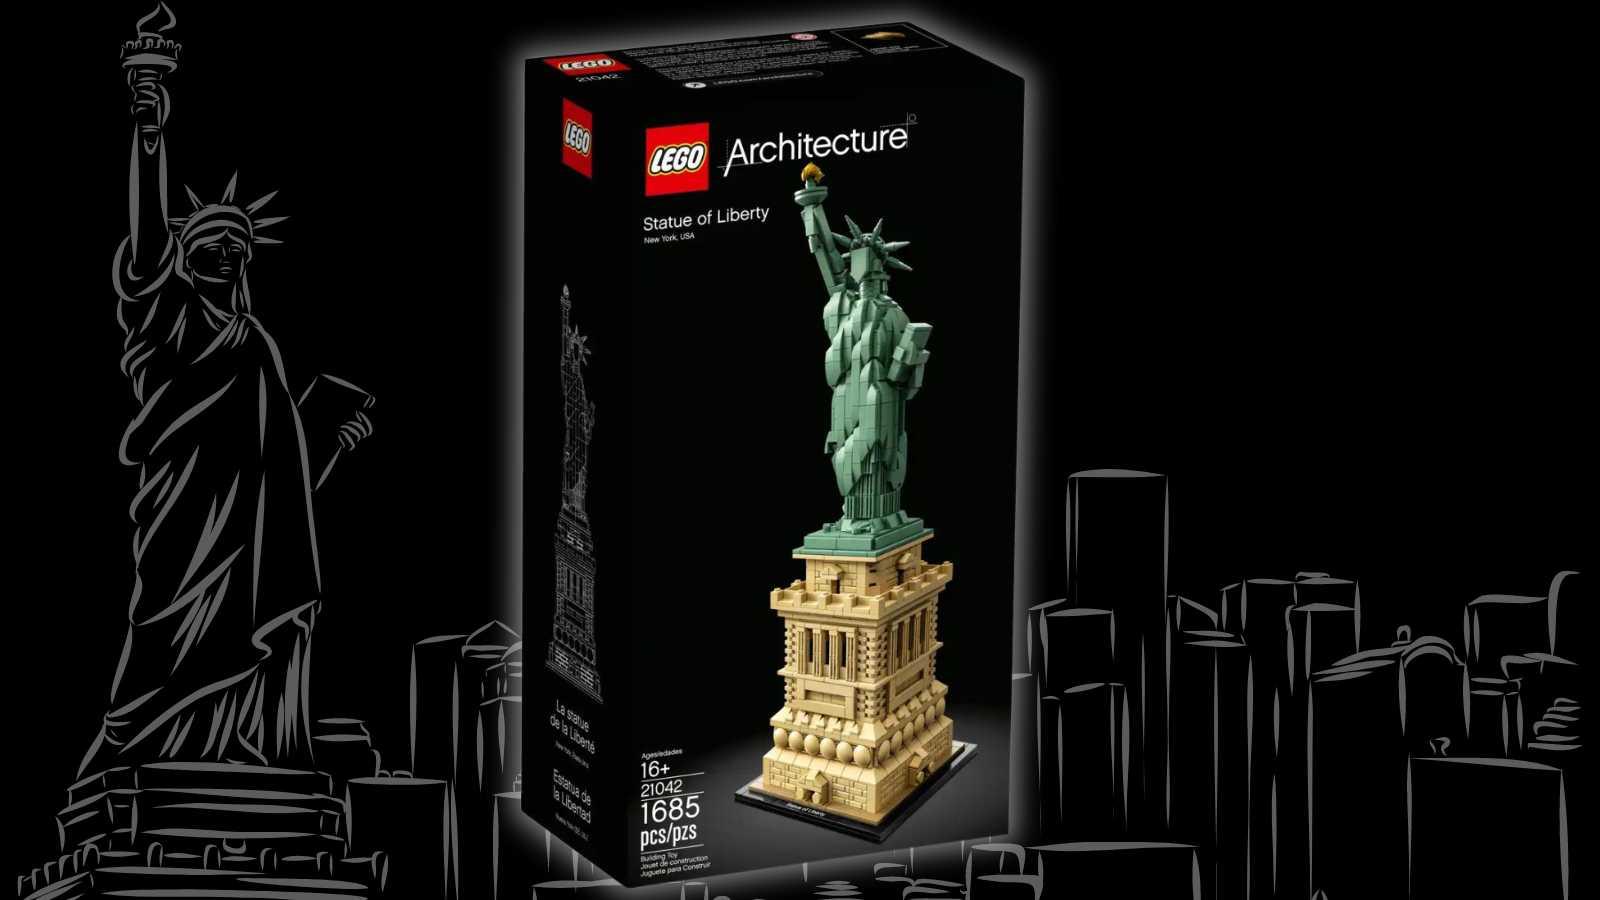 LEGO-reimagined Statue of Liberty set on a black background with a Statue of Liberty graphic.